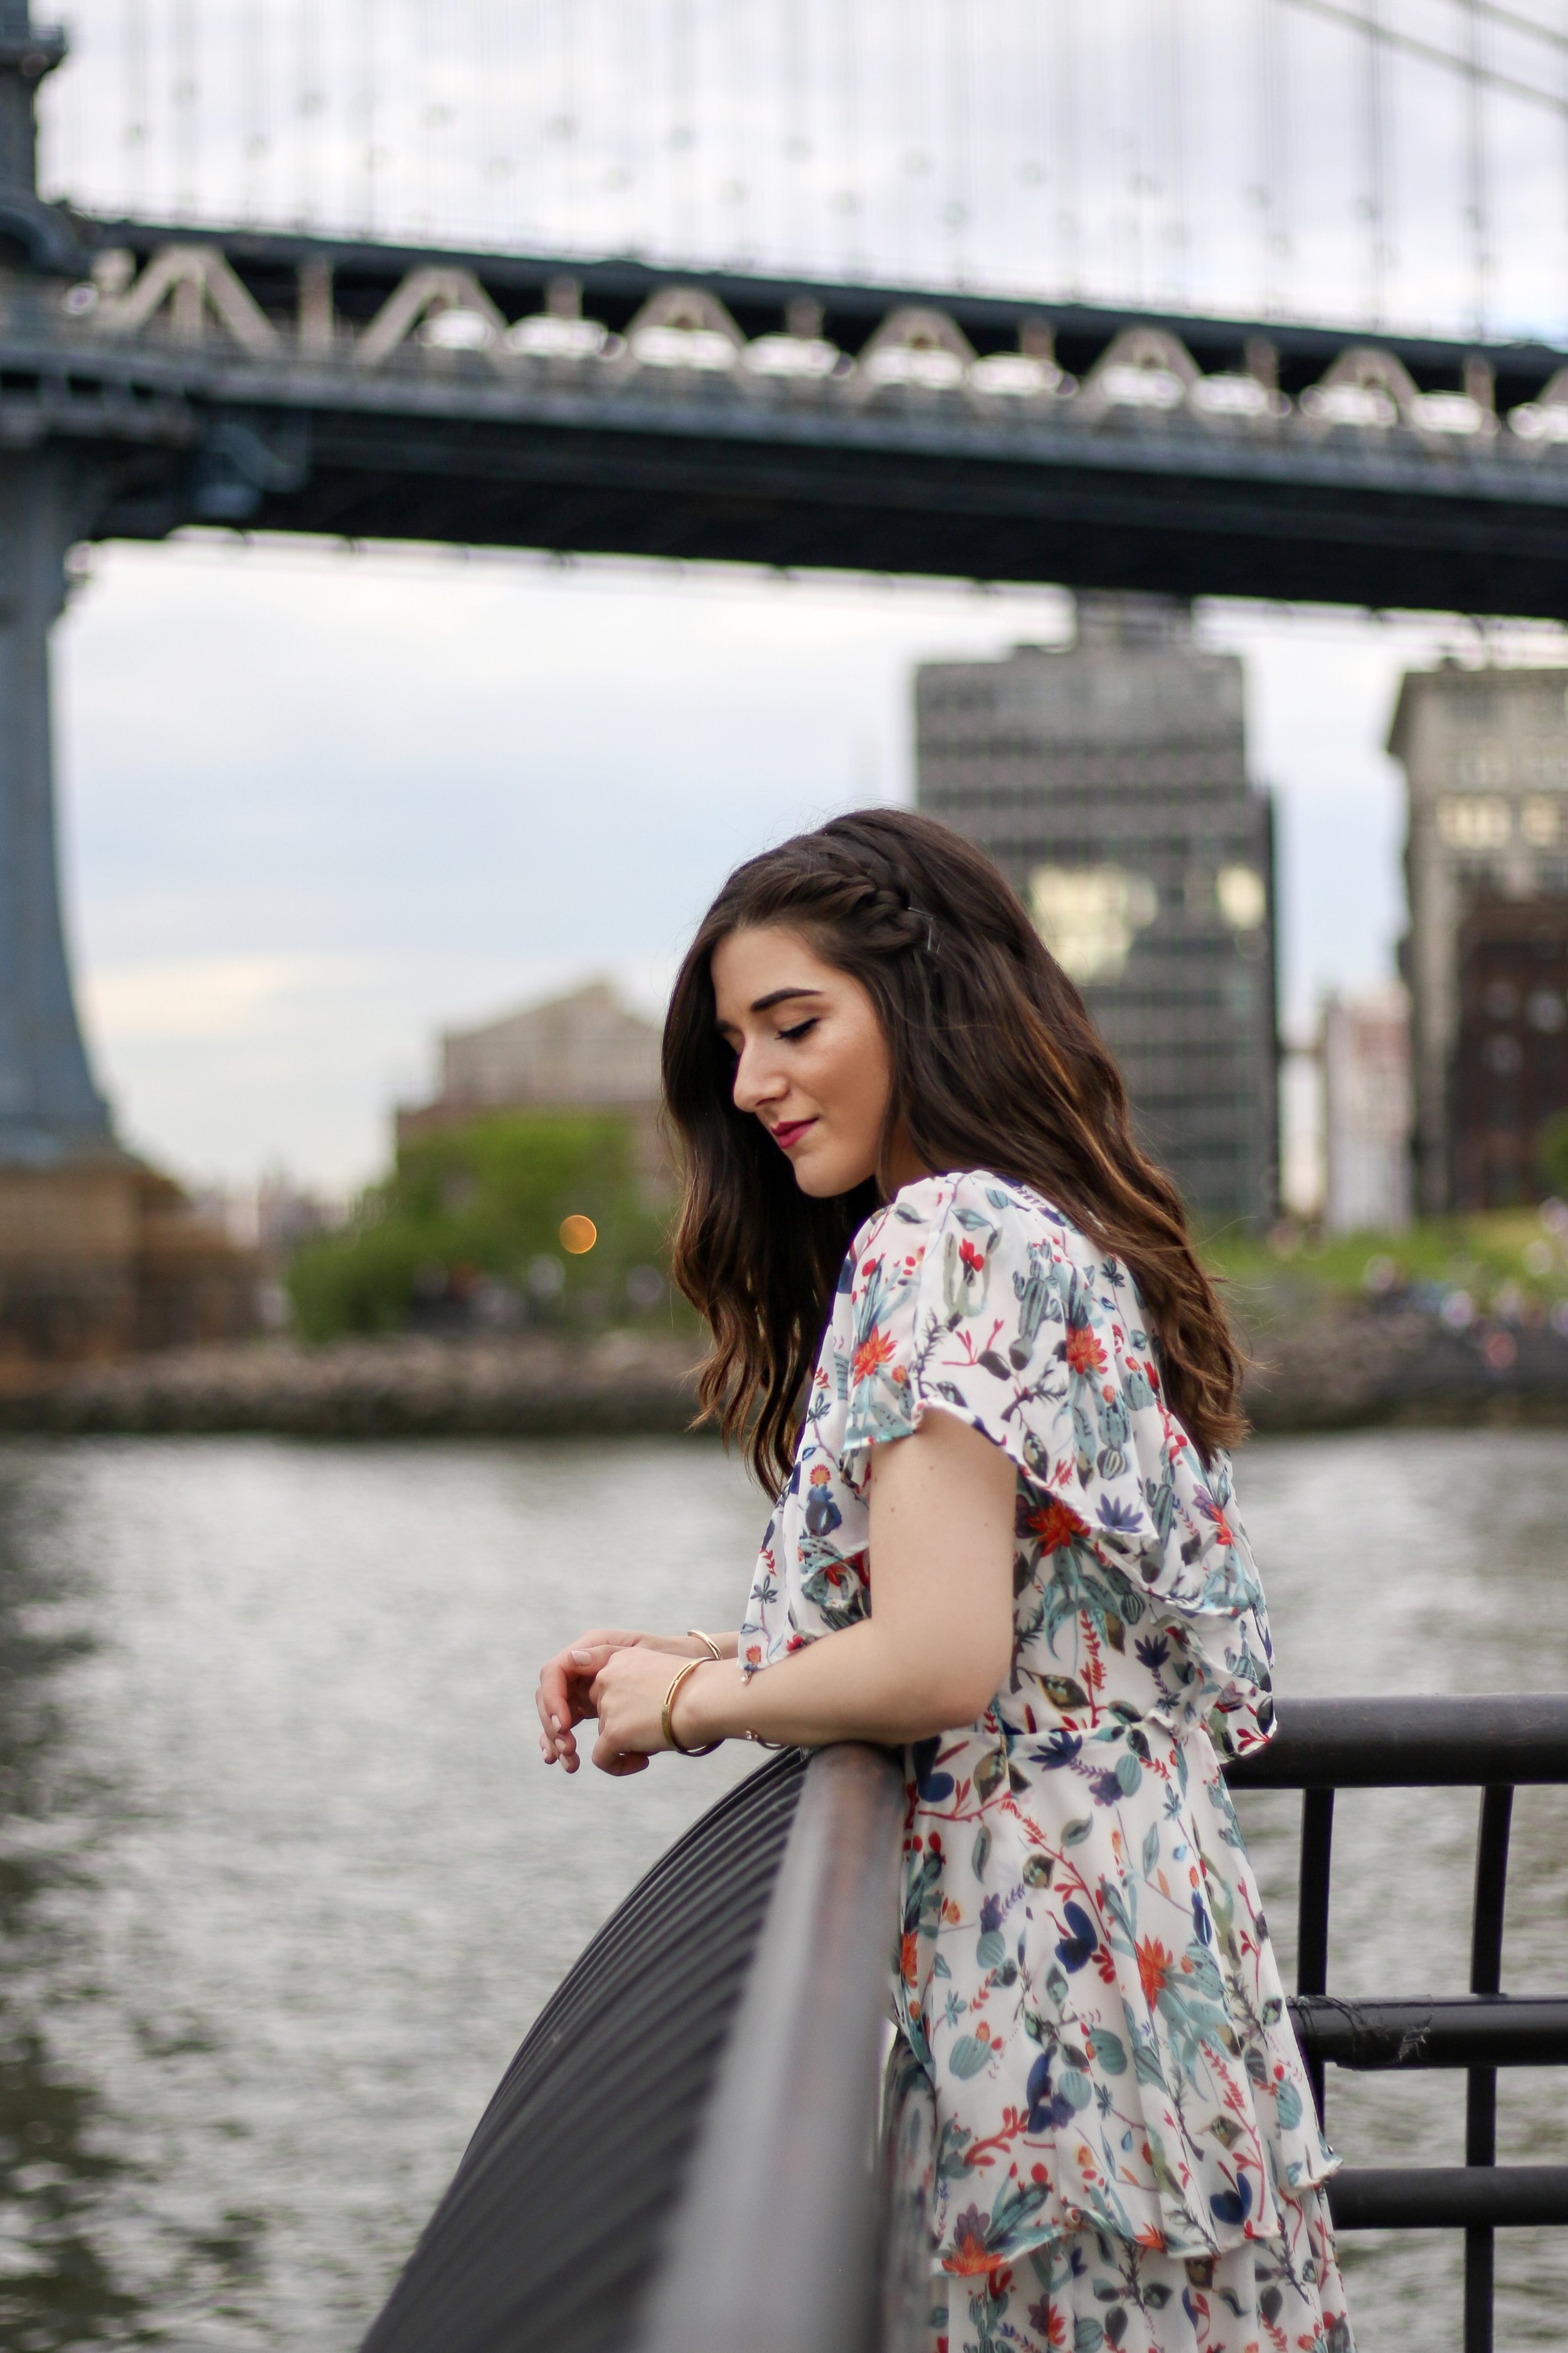 Ruffle Floral Maxi Dress Why You Should Trust Me Esther Santer Fashion Blog NYC Street Style Blogger Outfit OOTD Trendy Summer Outdoors Pretty Girly Photoshoot Feminine Beautiful Model Accessories Shoes Sandals Wedges Jewelry Gold Bracelets Women Shop.JPG